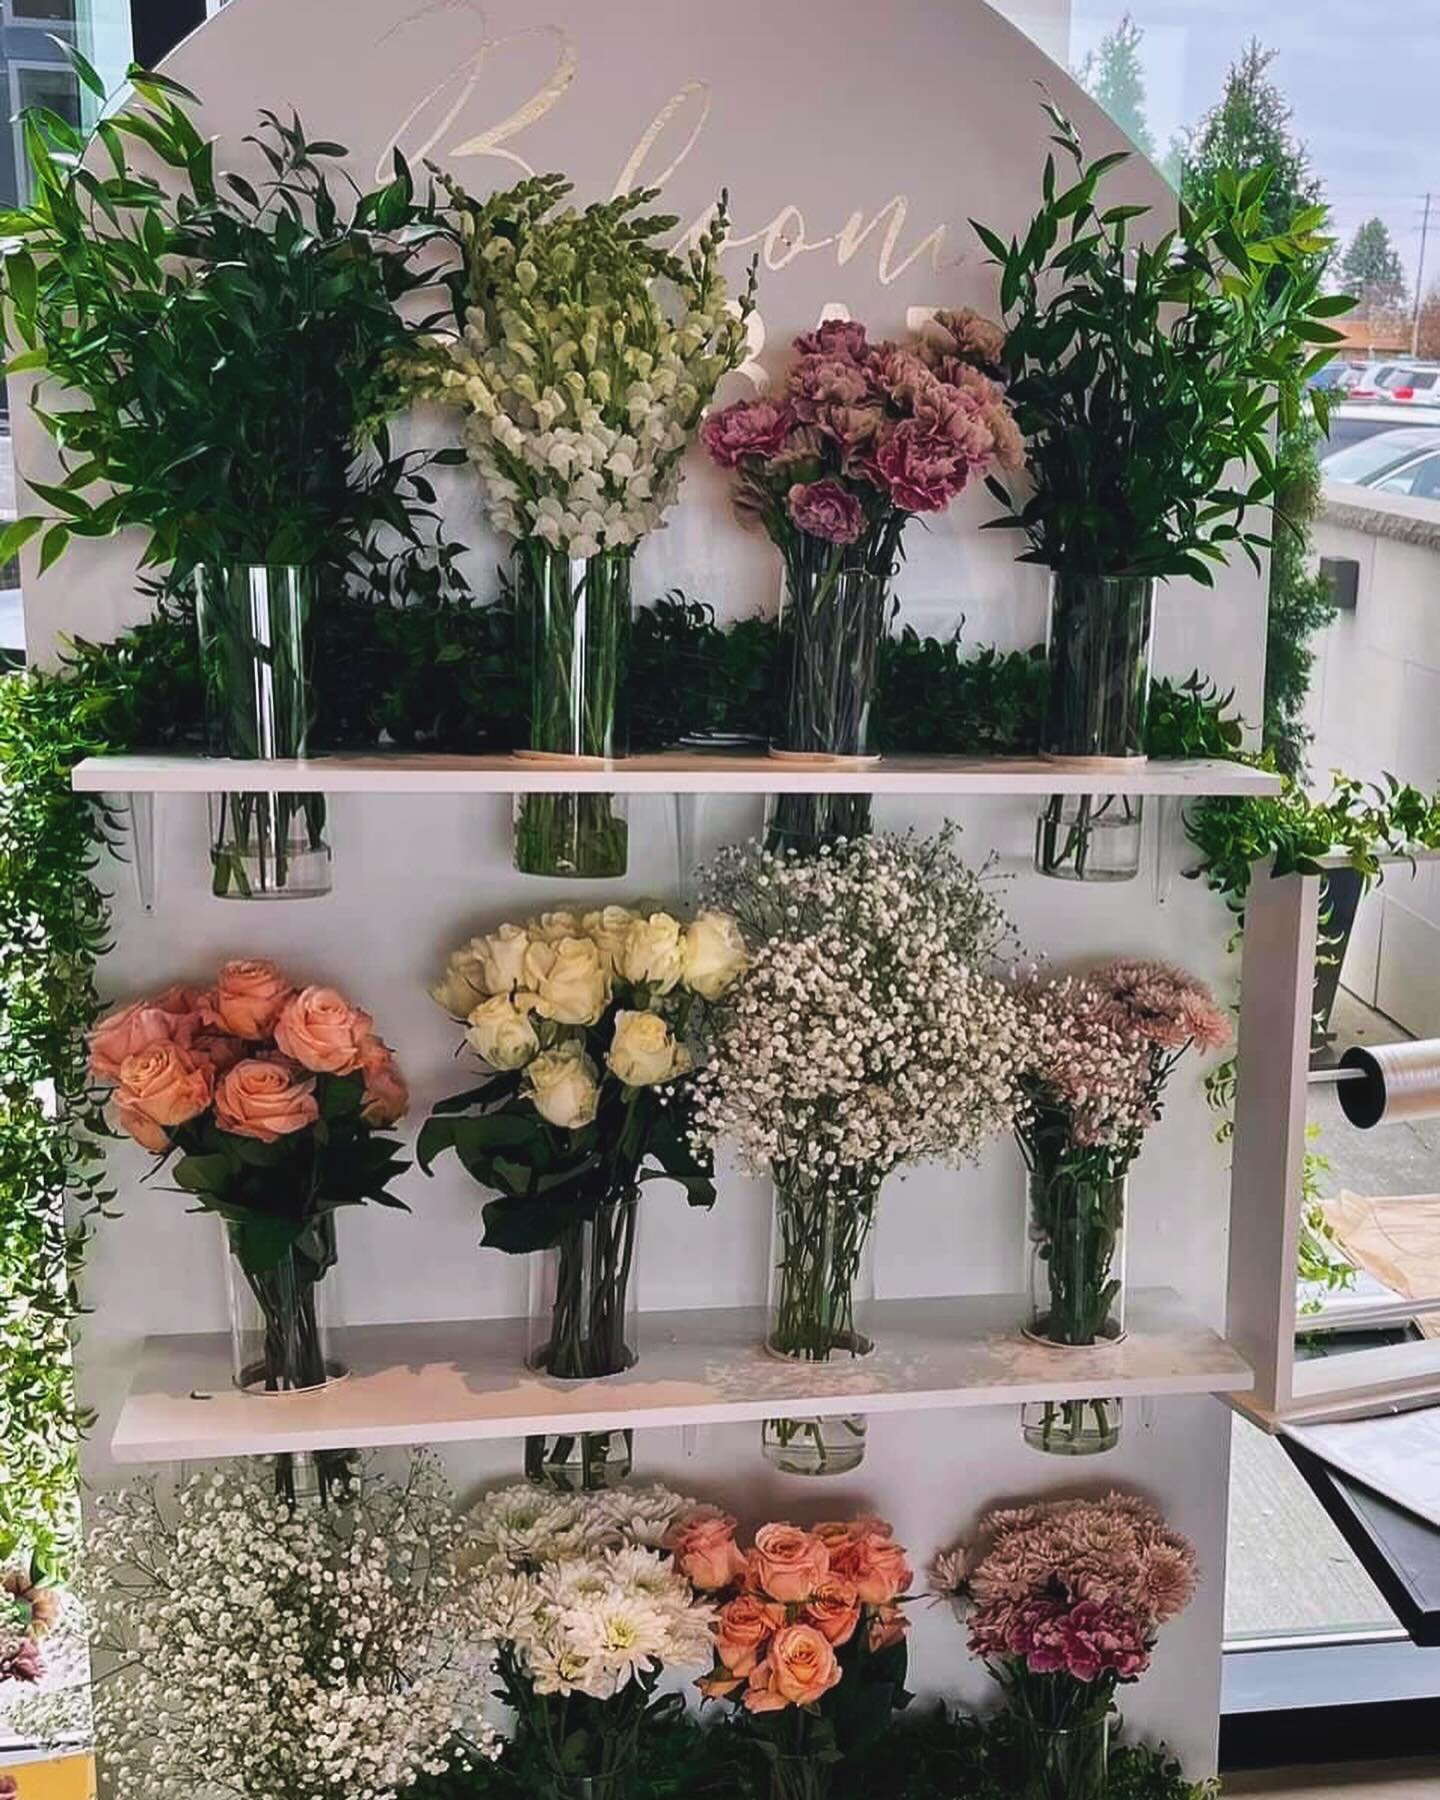 Transform your event with our Bloom Bar stations! 🌸✨ We offer TWO fabulous Bloom Bar stations to elevate your event! ✨ 

🌷 Our large Bloom Bar, complete with vases, ribbon, and a flower bar, is available for $150. 

🌻 For a more budget-friendly op